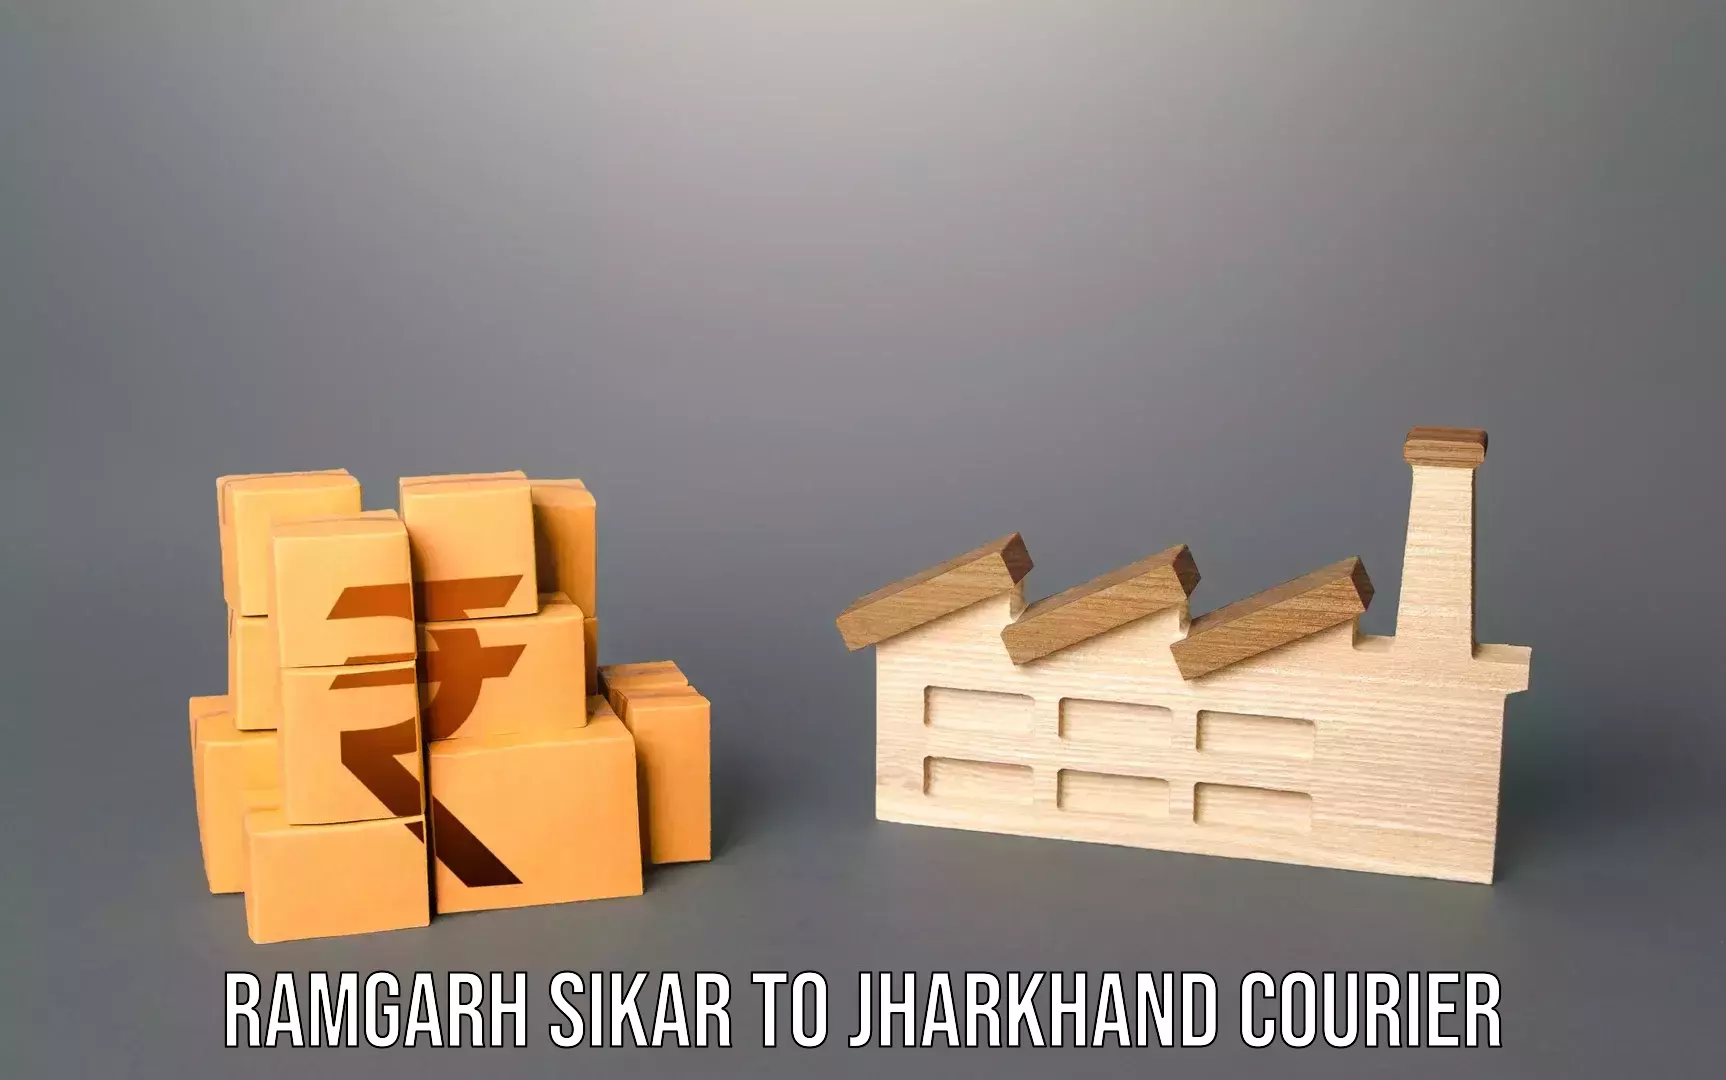 Professional baggage transport Ramgarh Sikar to Jharkhand